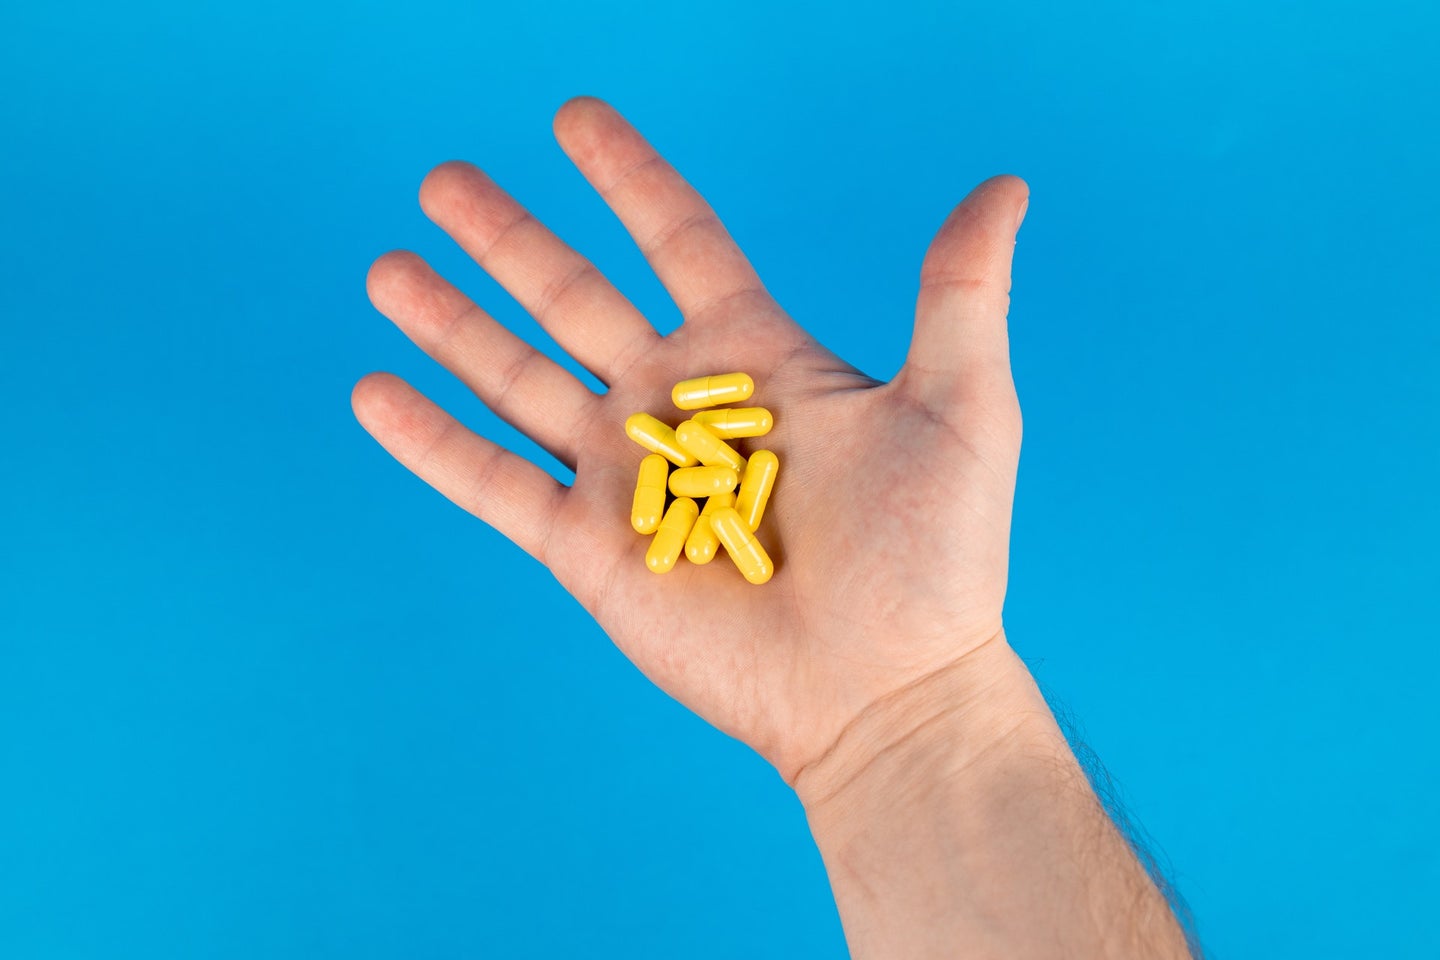 There is insufficient evidence that vitamin supplements help prevent cancer or heart disease.